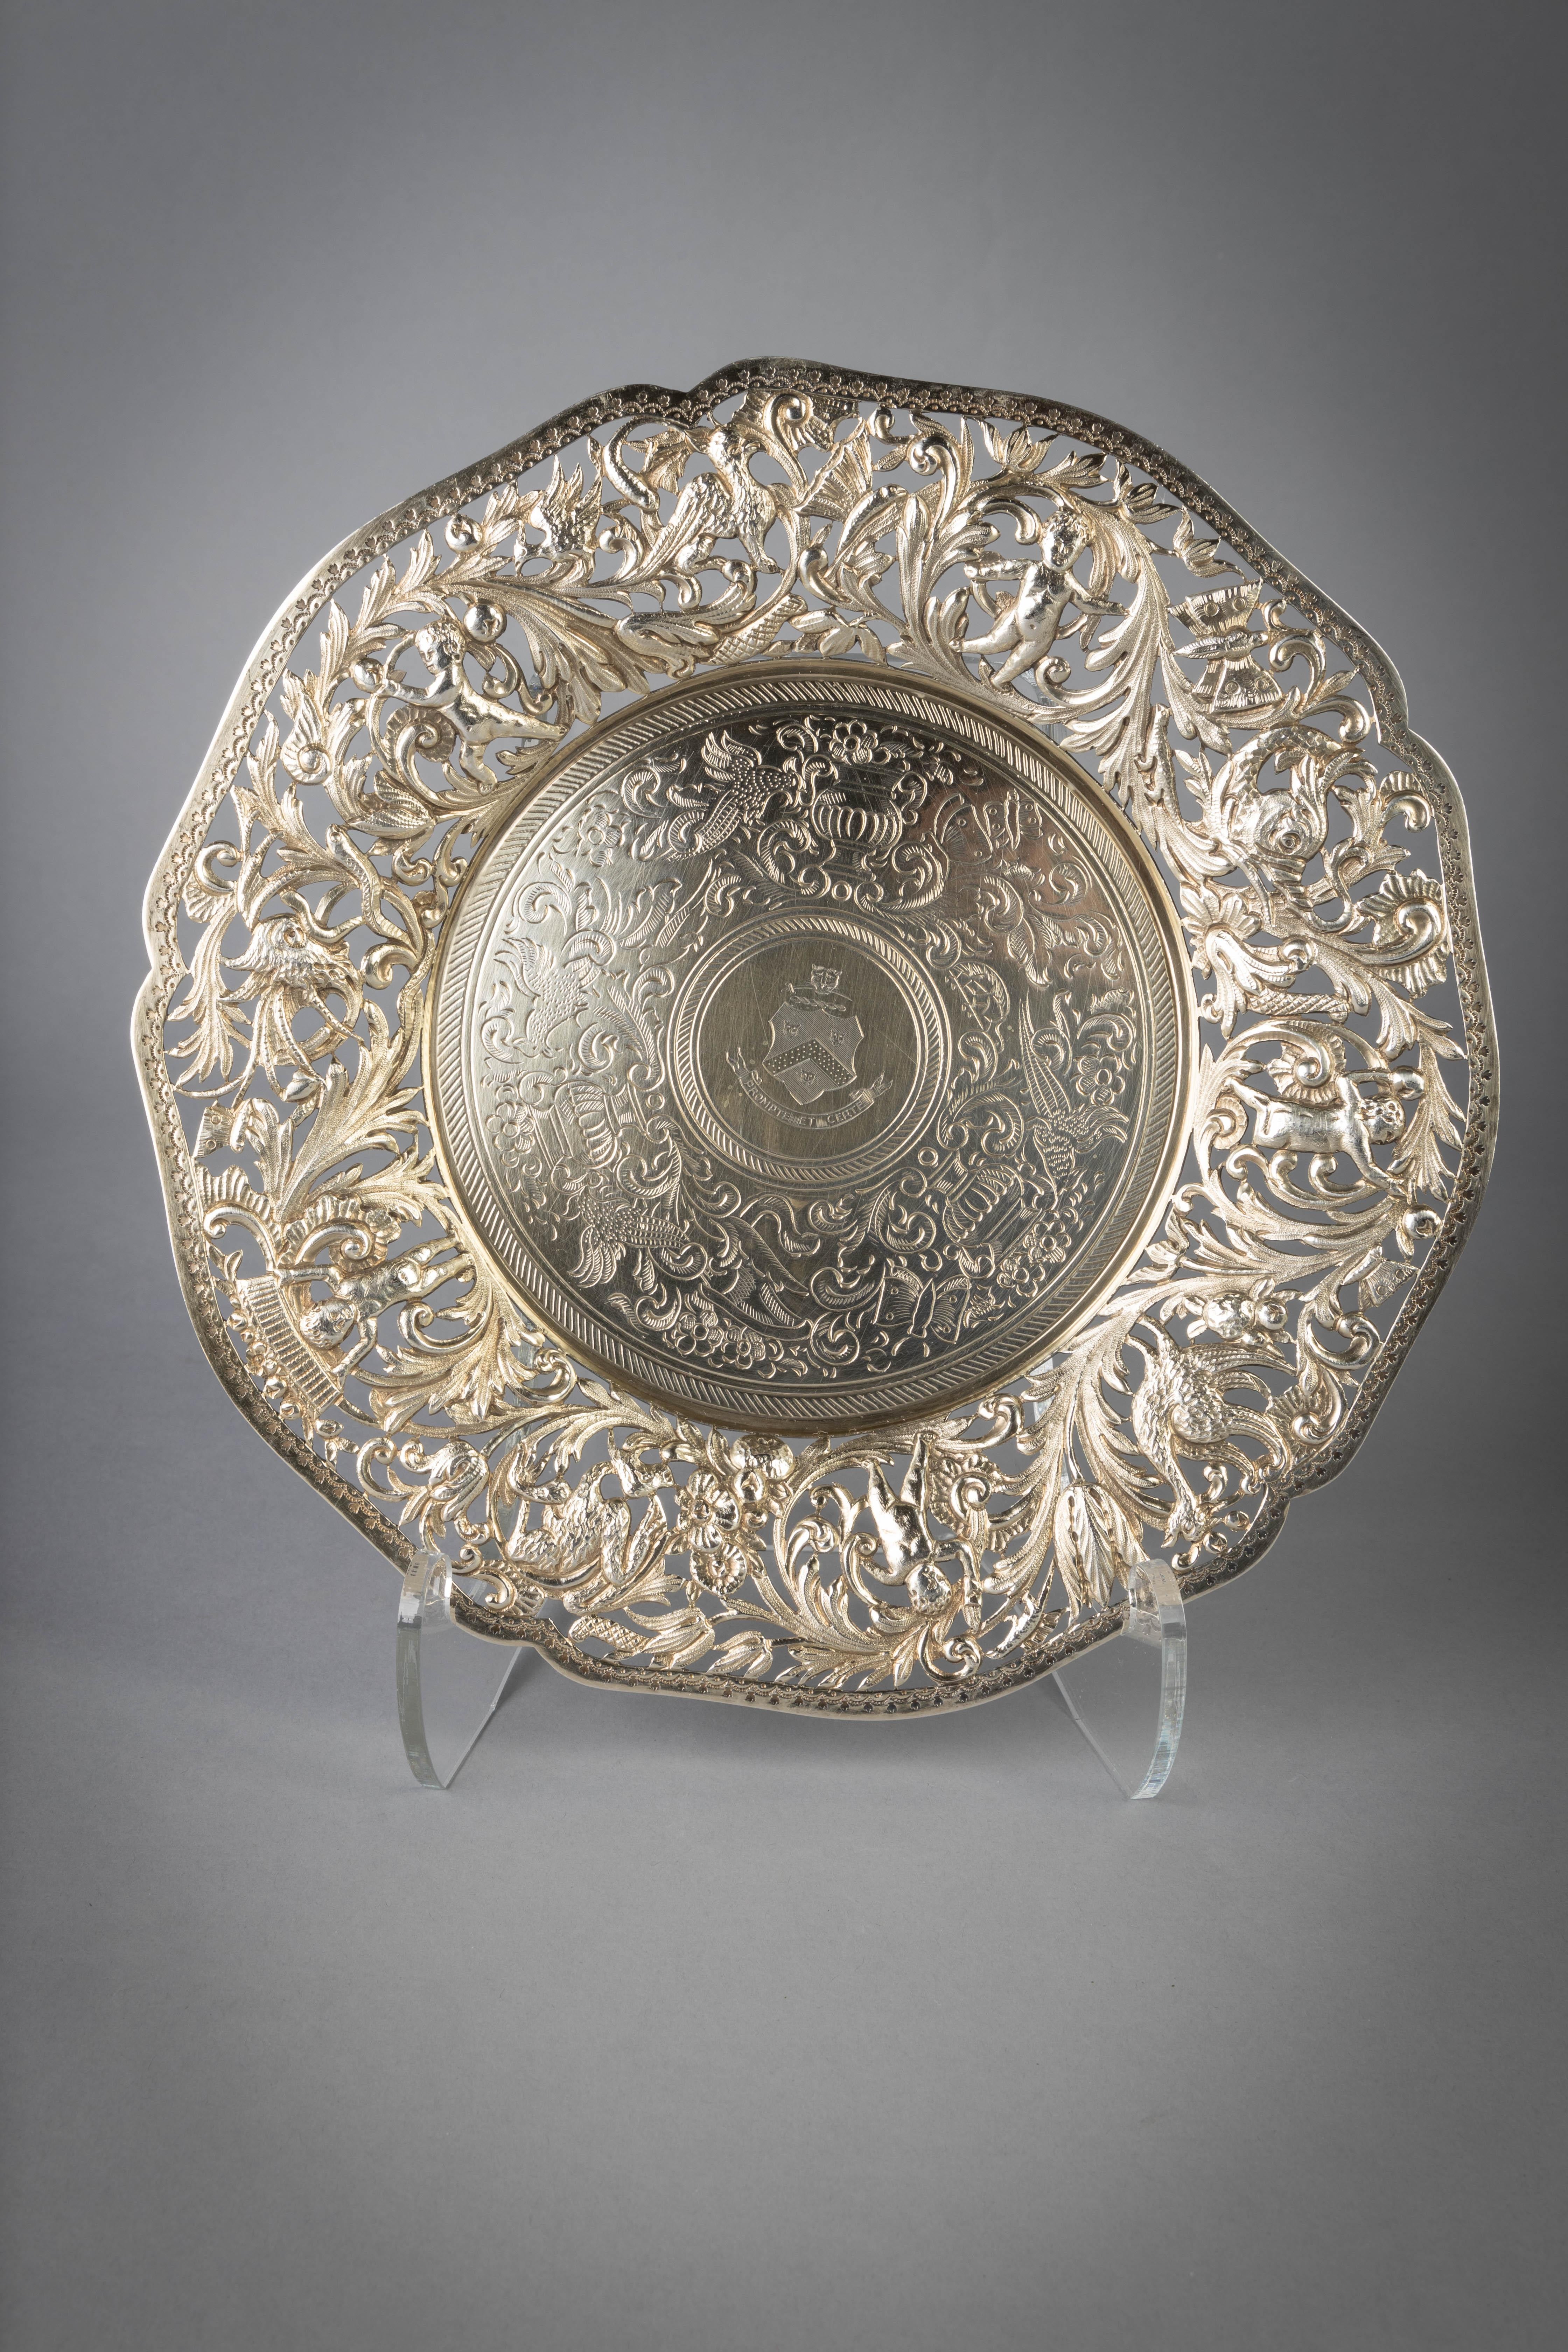 Late 19th Century Assembled Set of 19 Open-Work Silver Gilt Plates, circa 1880